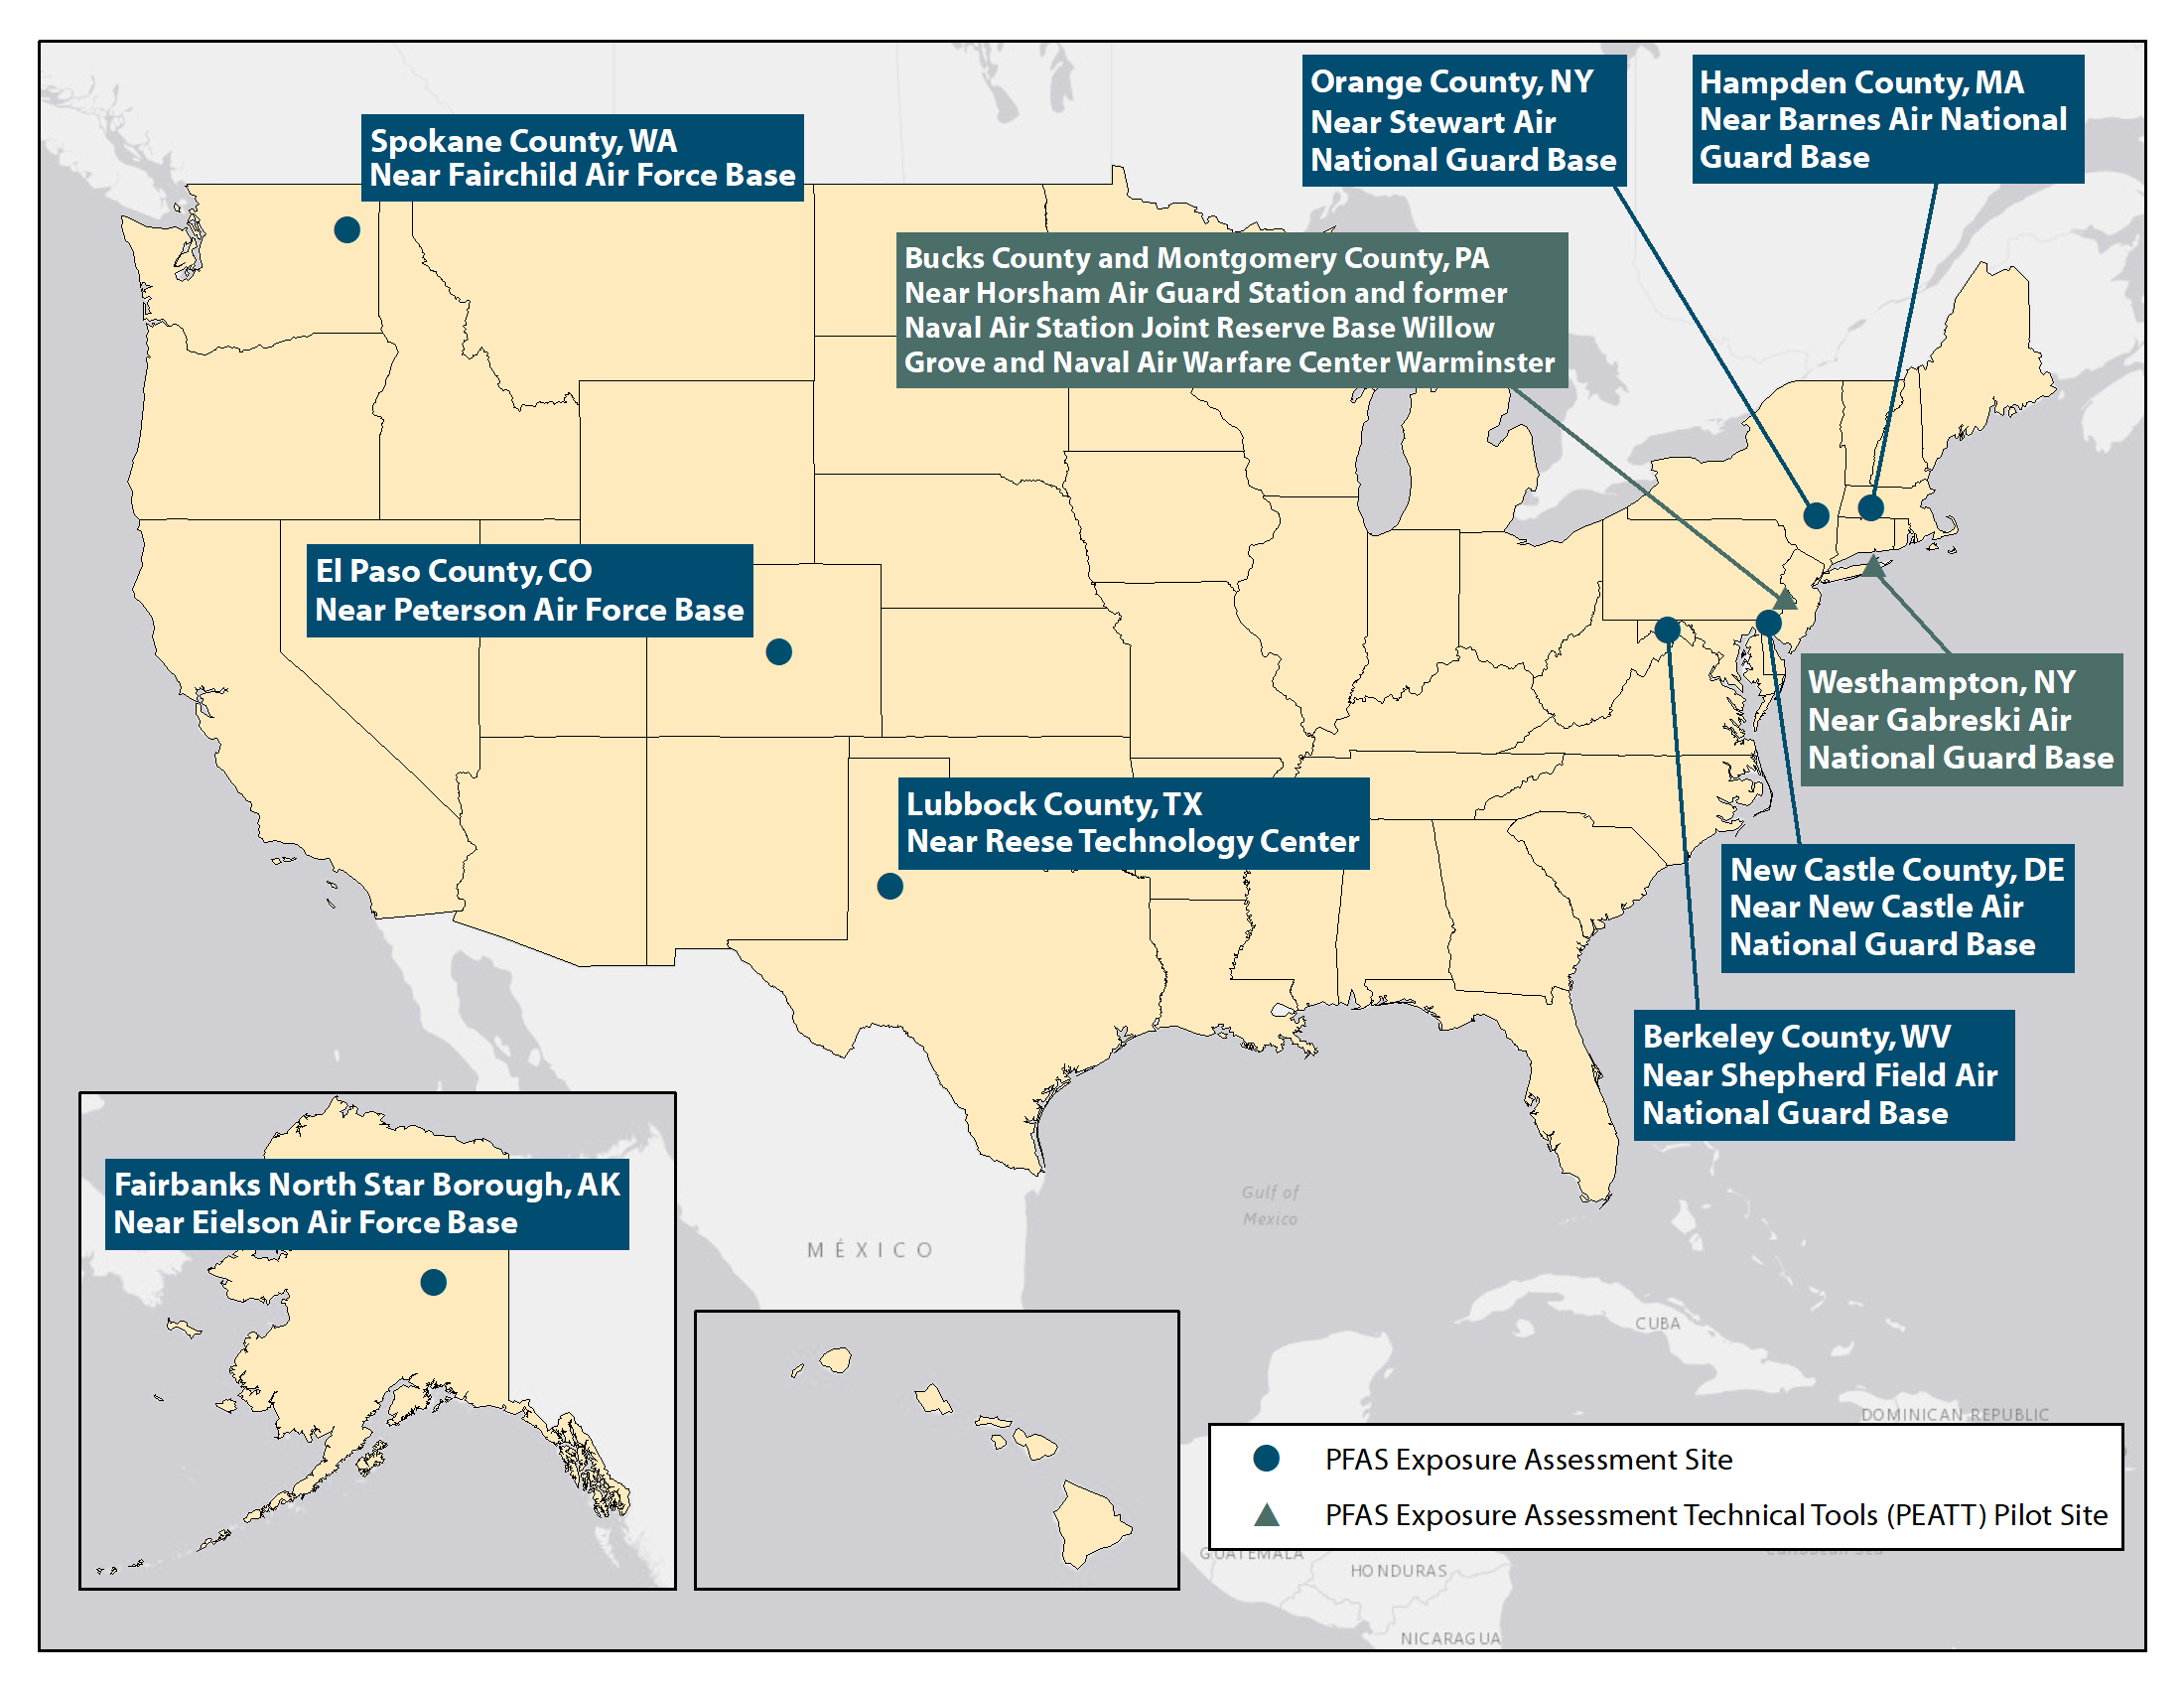 Image shows a map of the United States indicating the names and locations of the PFAS exposure assessment projects. The exposure assessment projects names and locations are the following: Hampden County, MA near Barnes Air National Guard Base, Berkeley County, WV near Shepherd Field Air National Guard Base, El Paso County, CO, near Peterson Air Force Base, Fairbanks North Star Borough, AK near Eielson Air Force Base, Lubbock County, TX near Reese Technology Center, Orange County, NY near Stewart Air National Guard Base, New Castle County, DE, near New Castle Air National Guard Base, and Spokane County, WA near Fairchild Air Force Base. In addition, there are two PFAS exposure assessment technical tool pilot sites. These are the Montgomery and Bucks County, PA near Horsham Air Guard Station and former Naval Air Station Joint Reserve Willow Grove and Naval Warfare  Center Warminster, and the West Hampton New York near Gabreski Air National Guard Base.